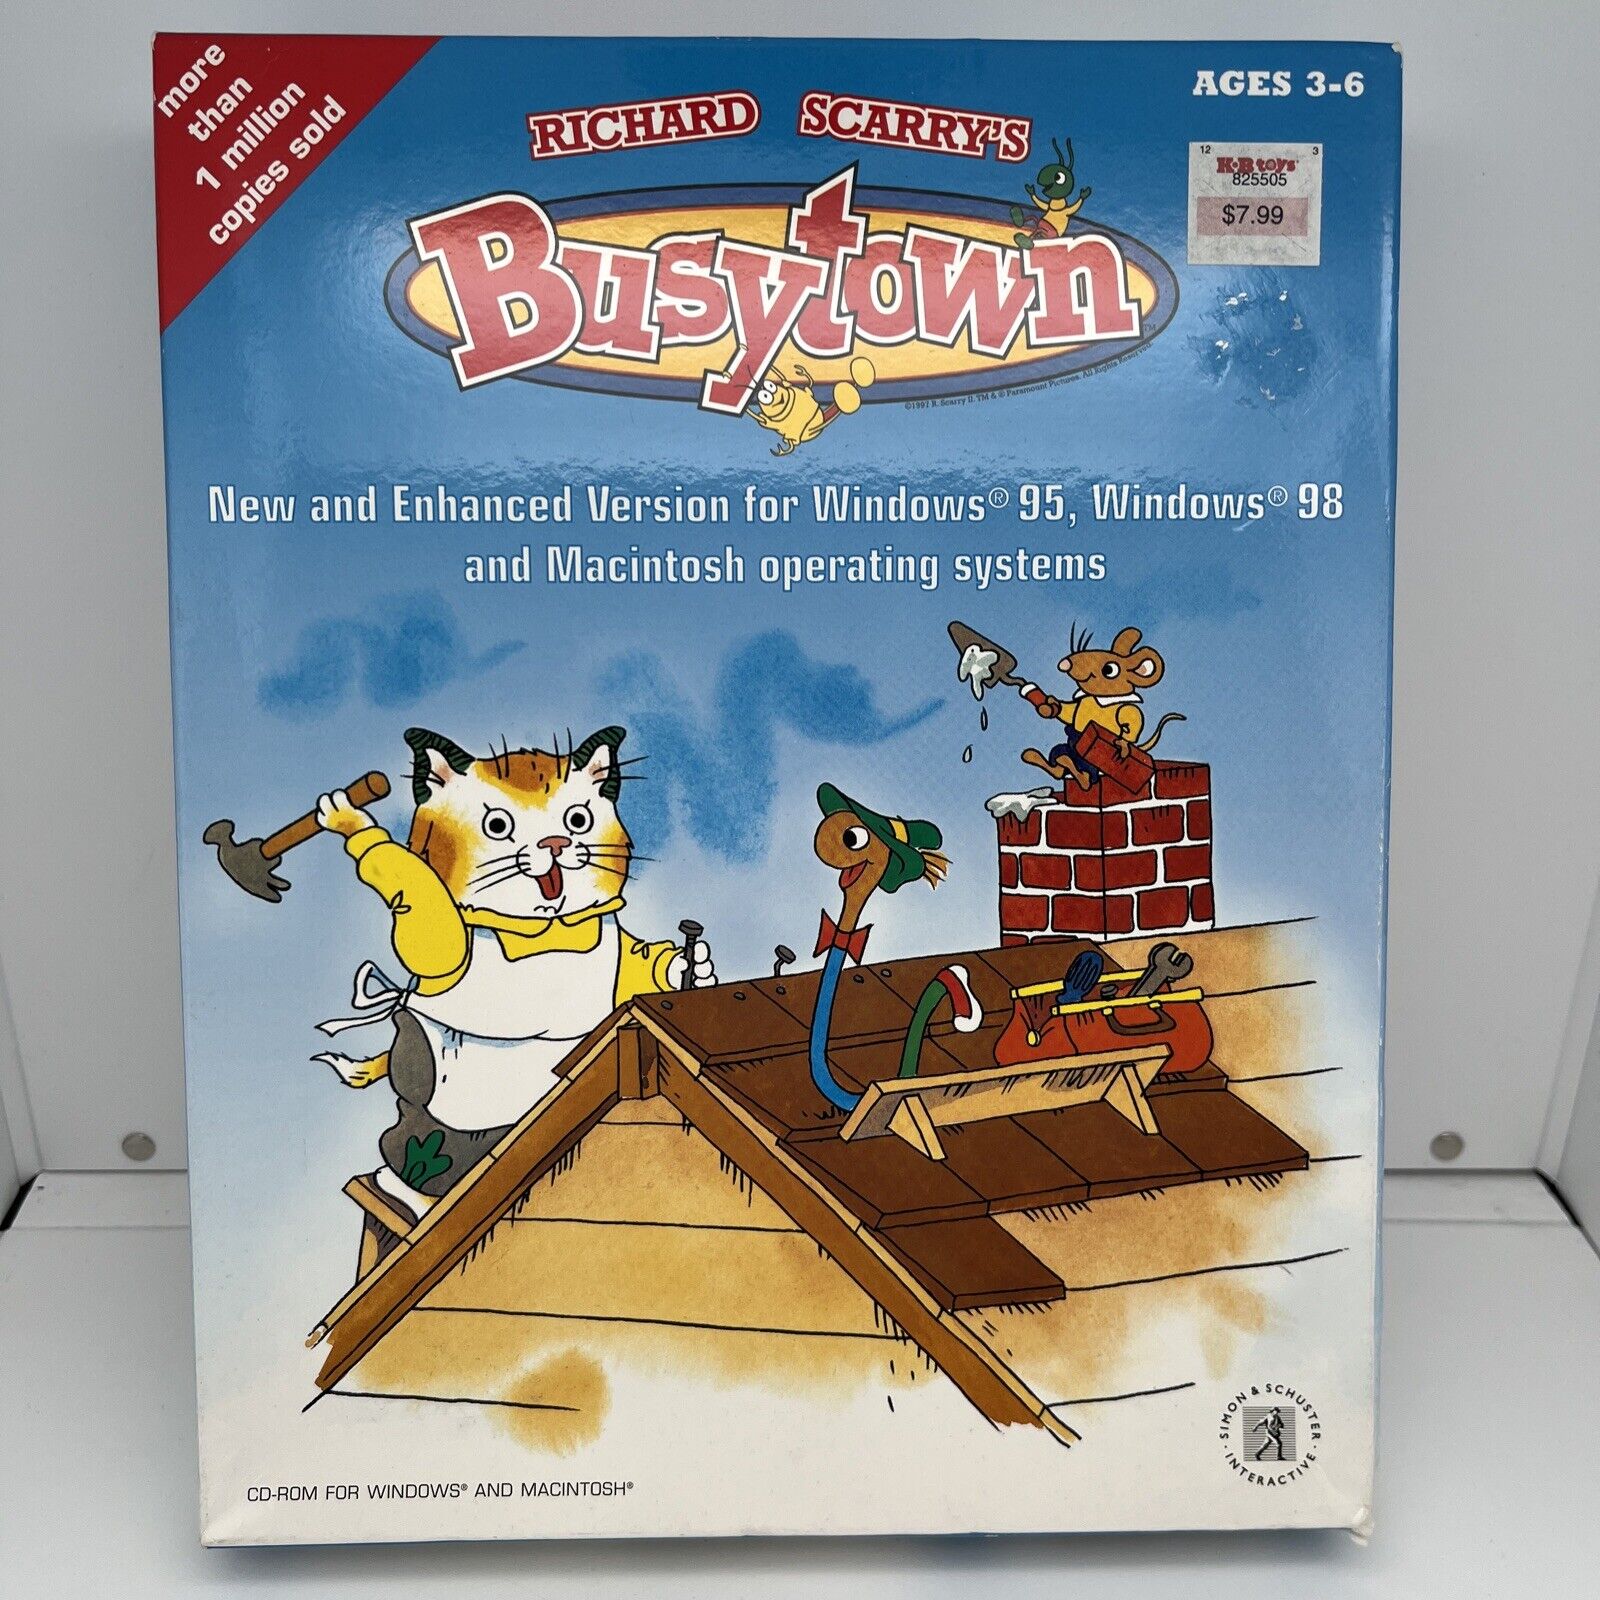 Richard Scarry's Busytown 2000 by Richard Scarry (1999, CD-ROM) SEALED Big Box